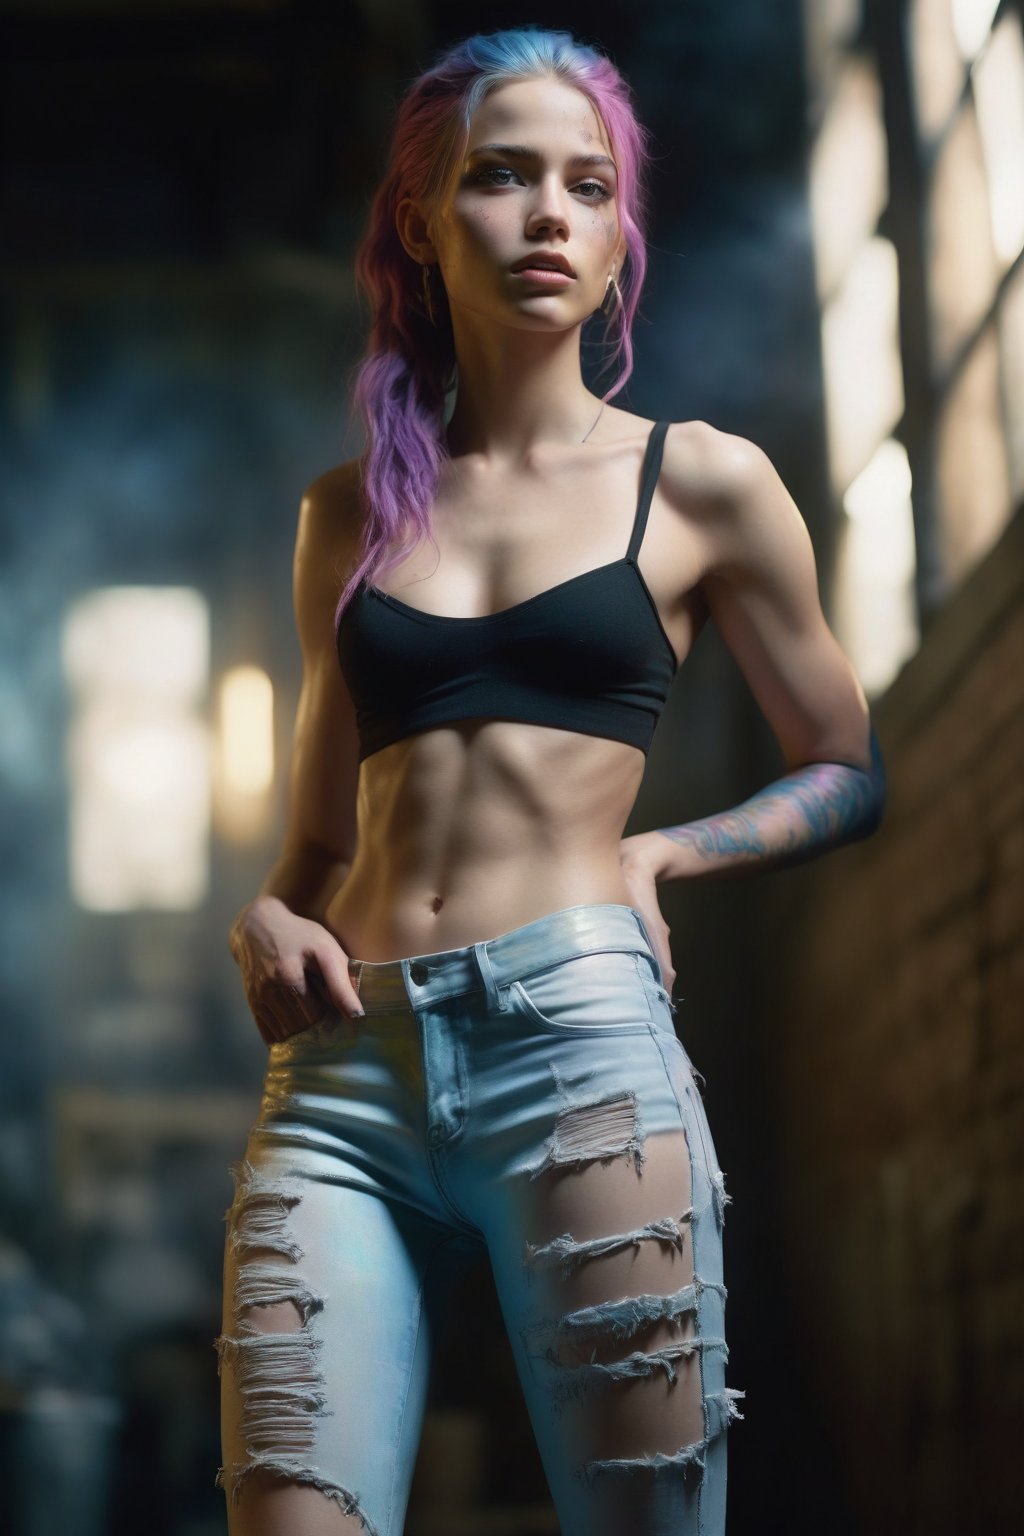 Jinx, (High Detail Iridescent Skin:1.2), (High Detail Face), Sexy Clothes, Ripped Pants, (Photorealistic:1.4), Best Quality, Masterpiece, Edge Lighting, Backlighting, Studio Lighting, Raw Photography , 50mm lens, bokeh, depth of field, by Annie Leibovitz